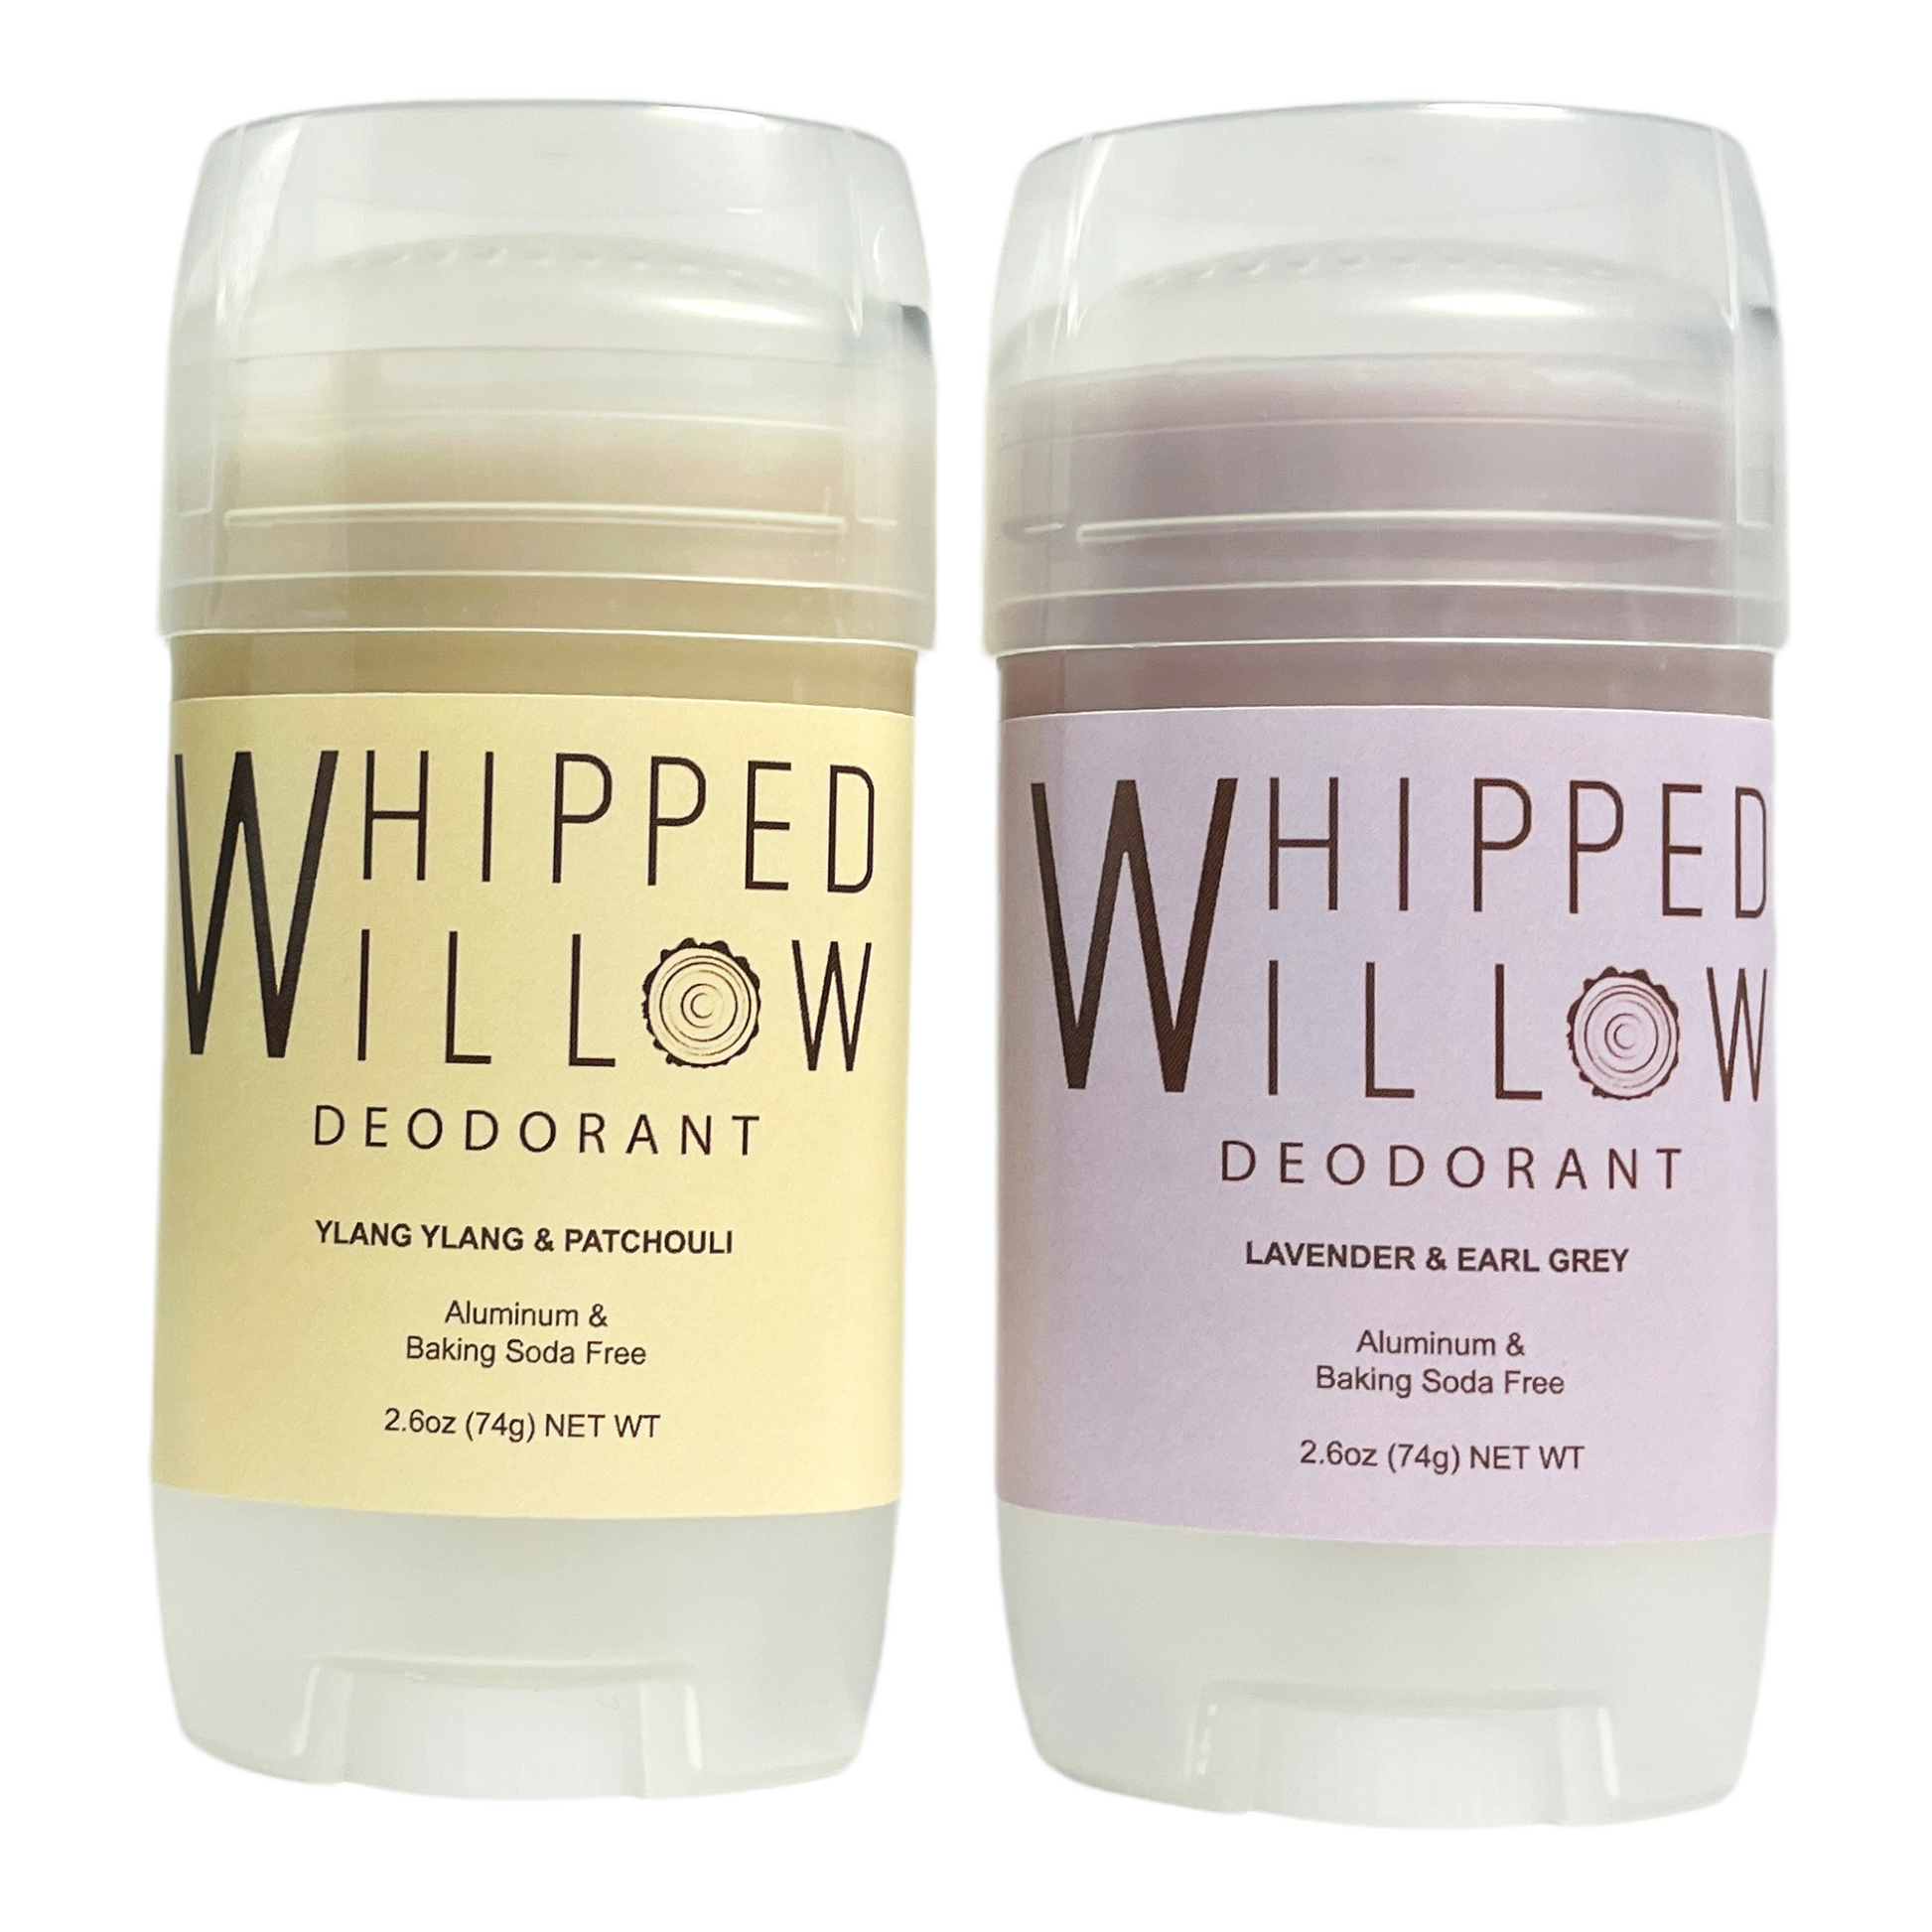 Whipped Willow Ylang Ylang Patchouli deodorant and Lavender deodorant 